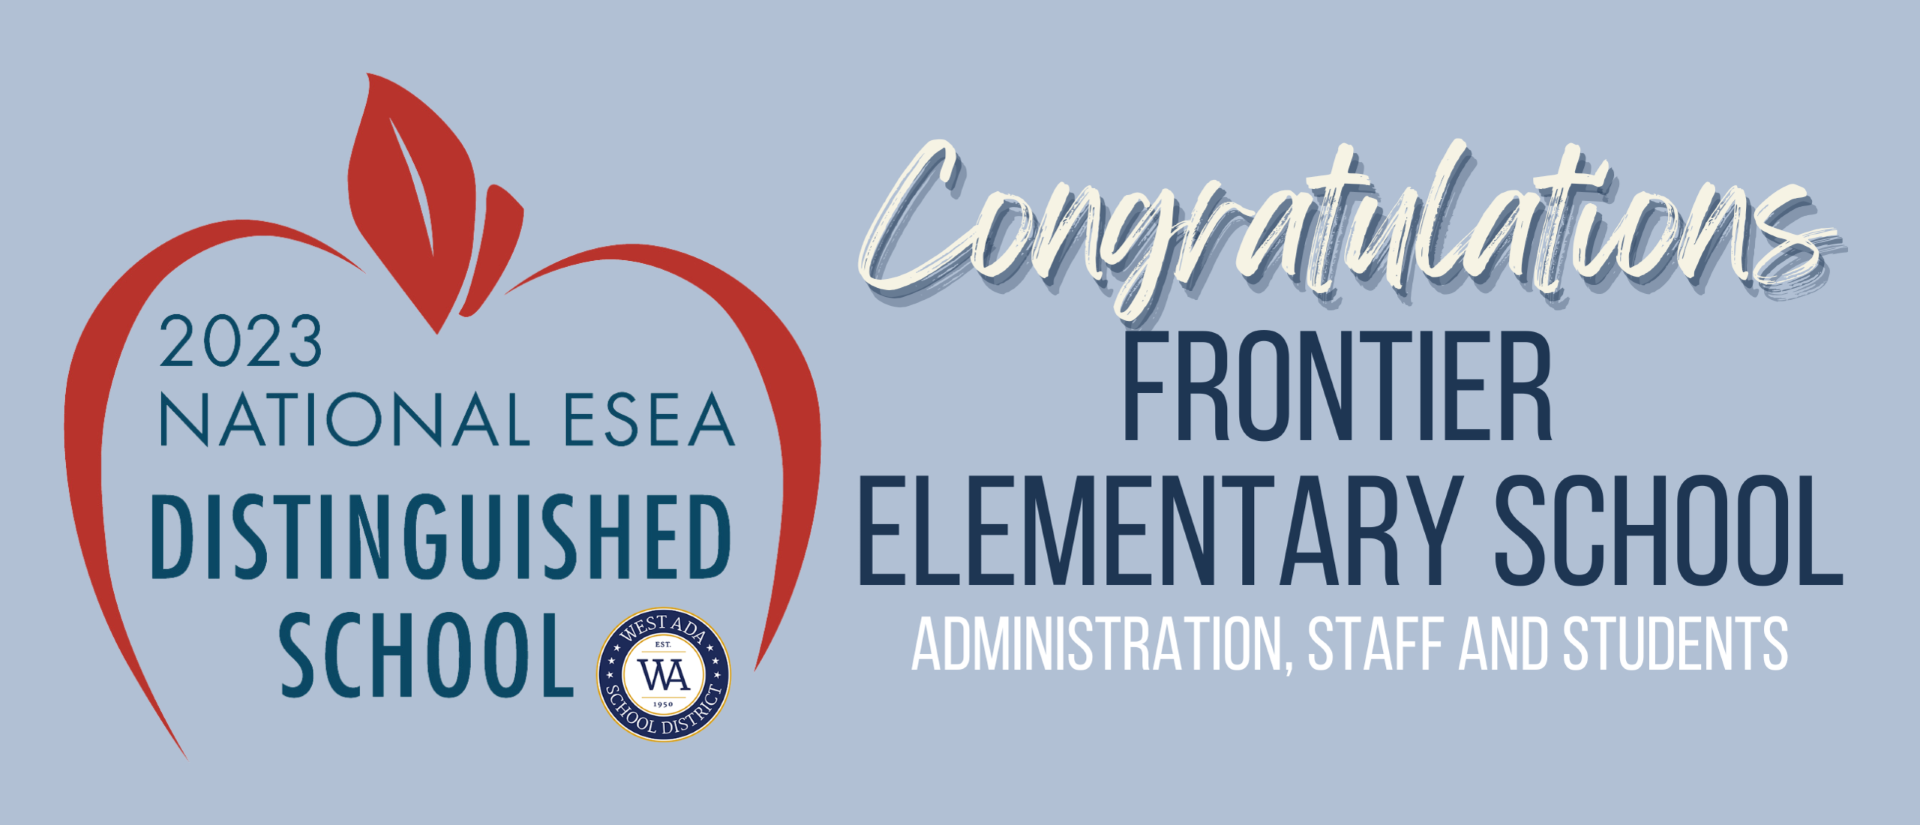 Congratulations Frontier Elementary Administrations, Staff, and Students. 2023 National ESEA Distinguished School